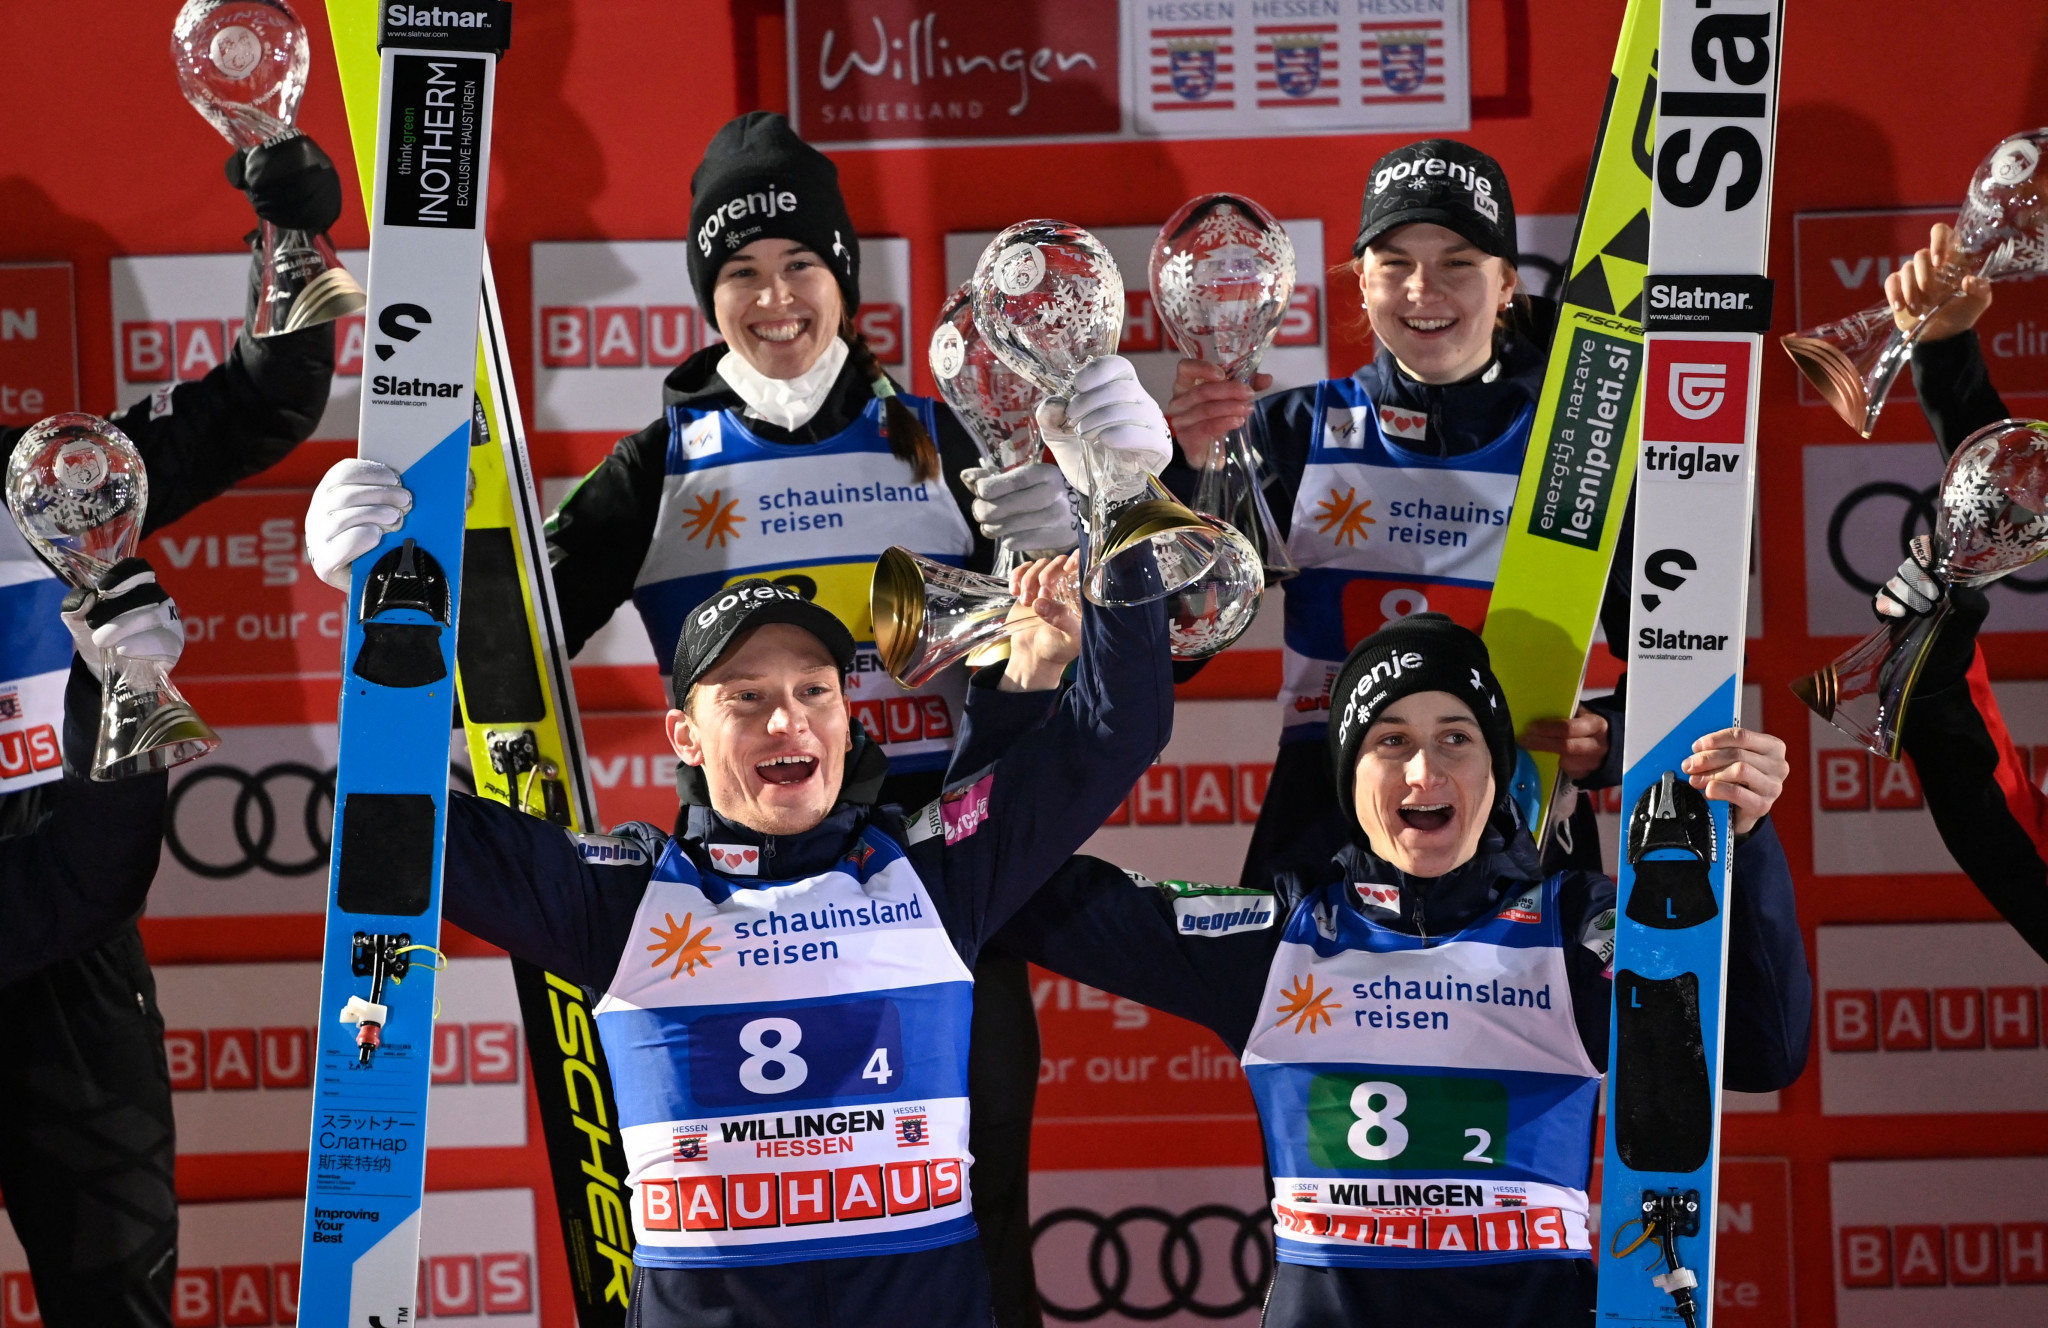 Slovenia won the mixed team event in Willingen ©Getty Images